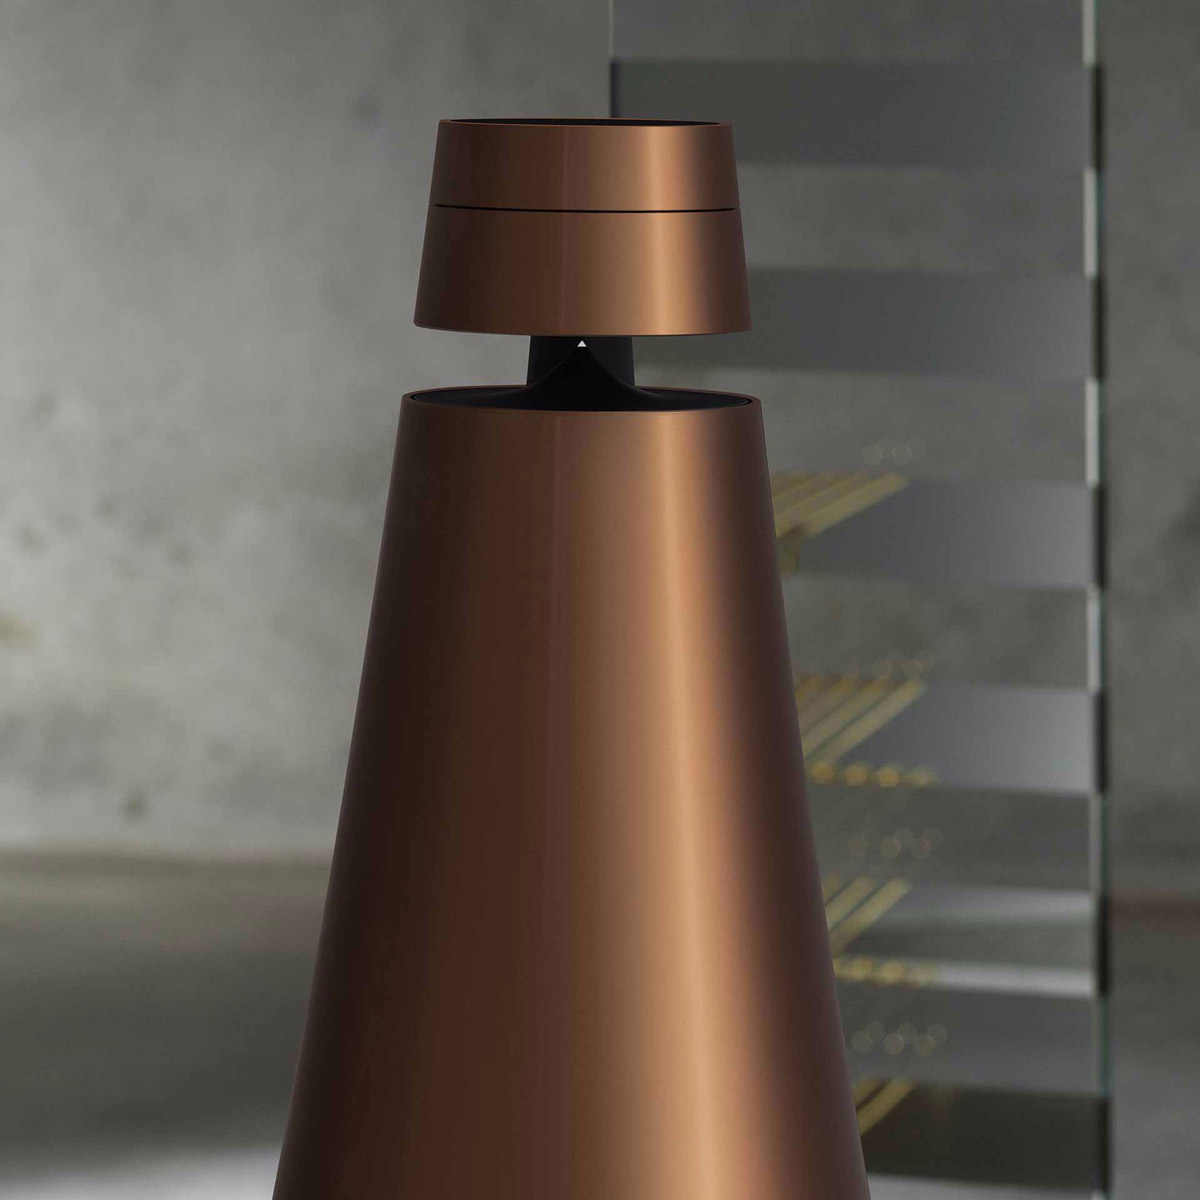 Bang & Olufsen Beosound 1 with The Google Assistant